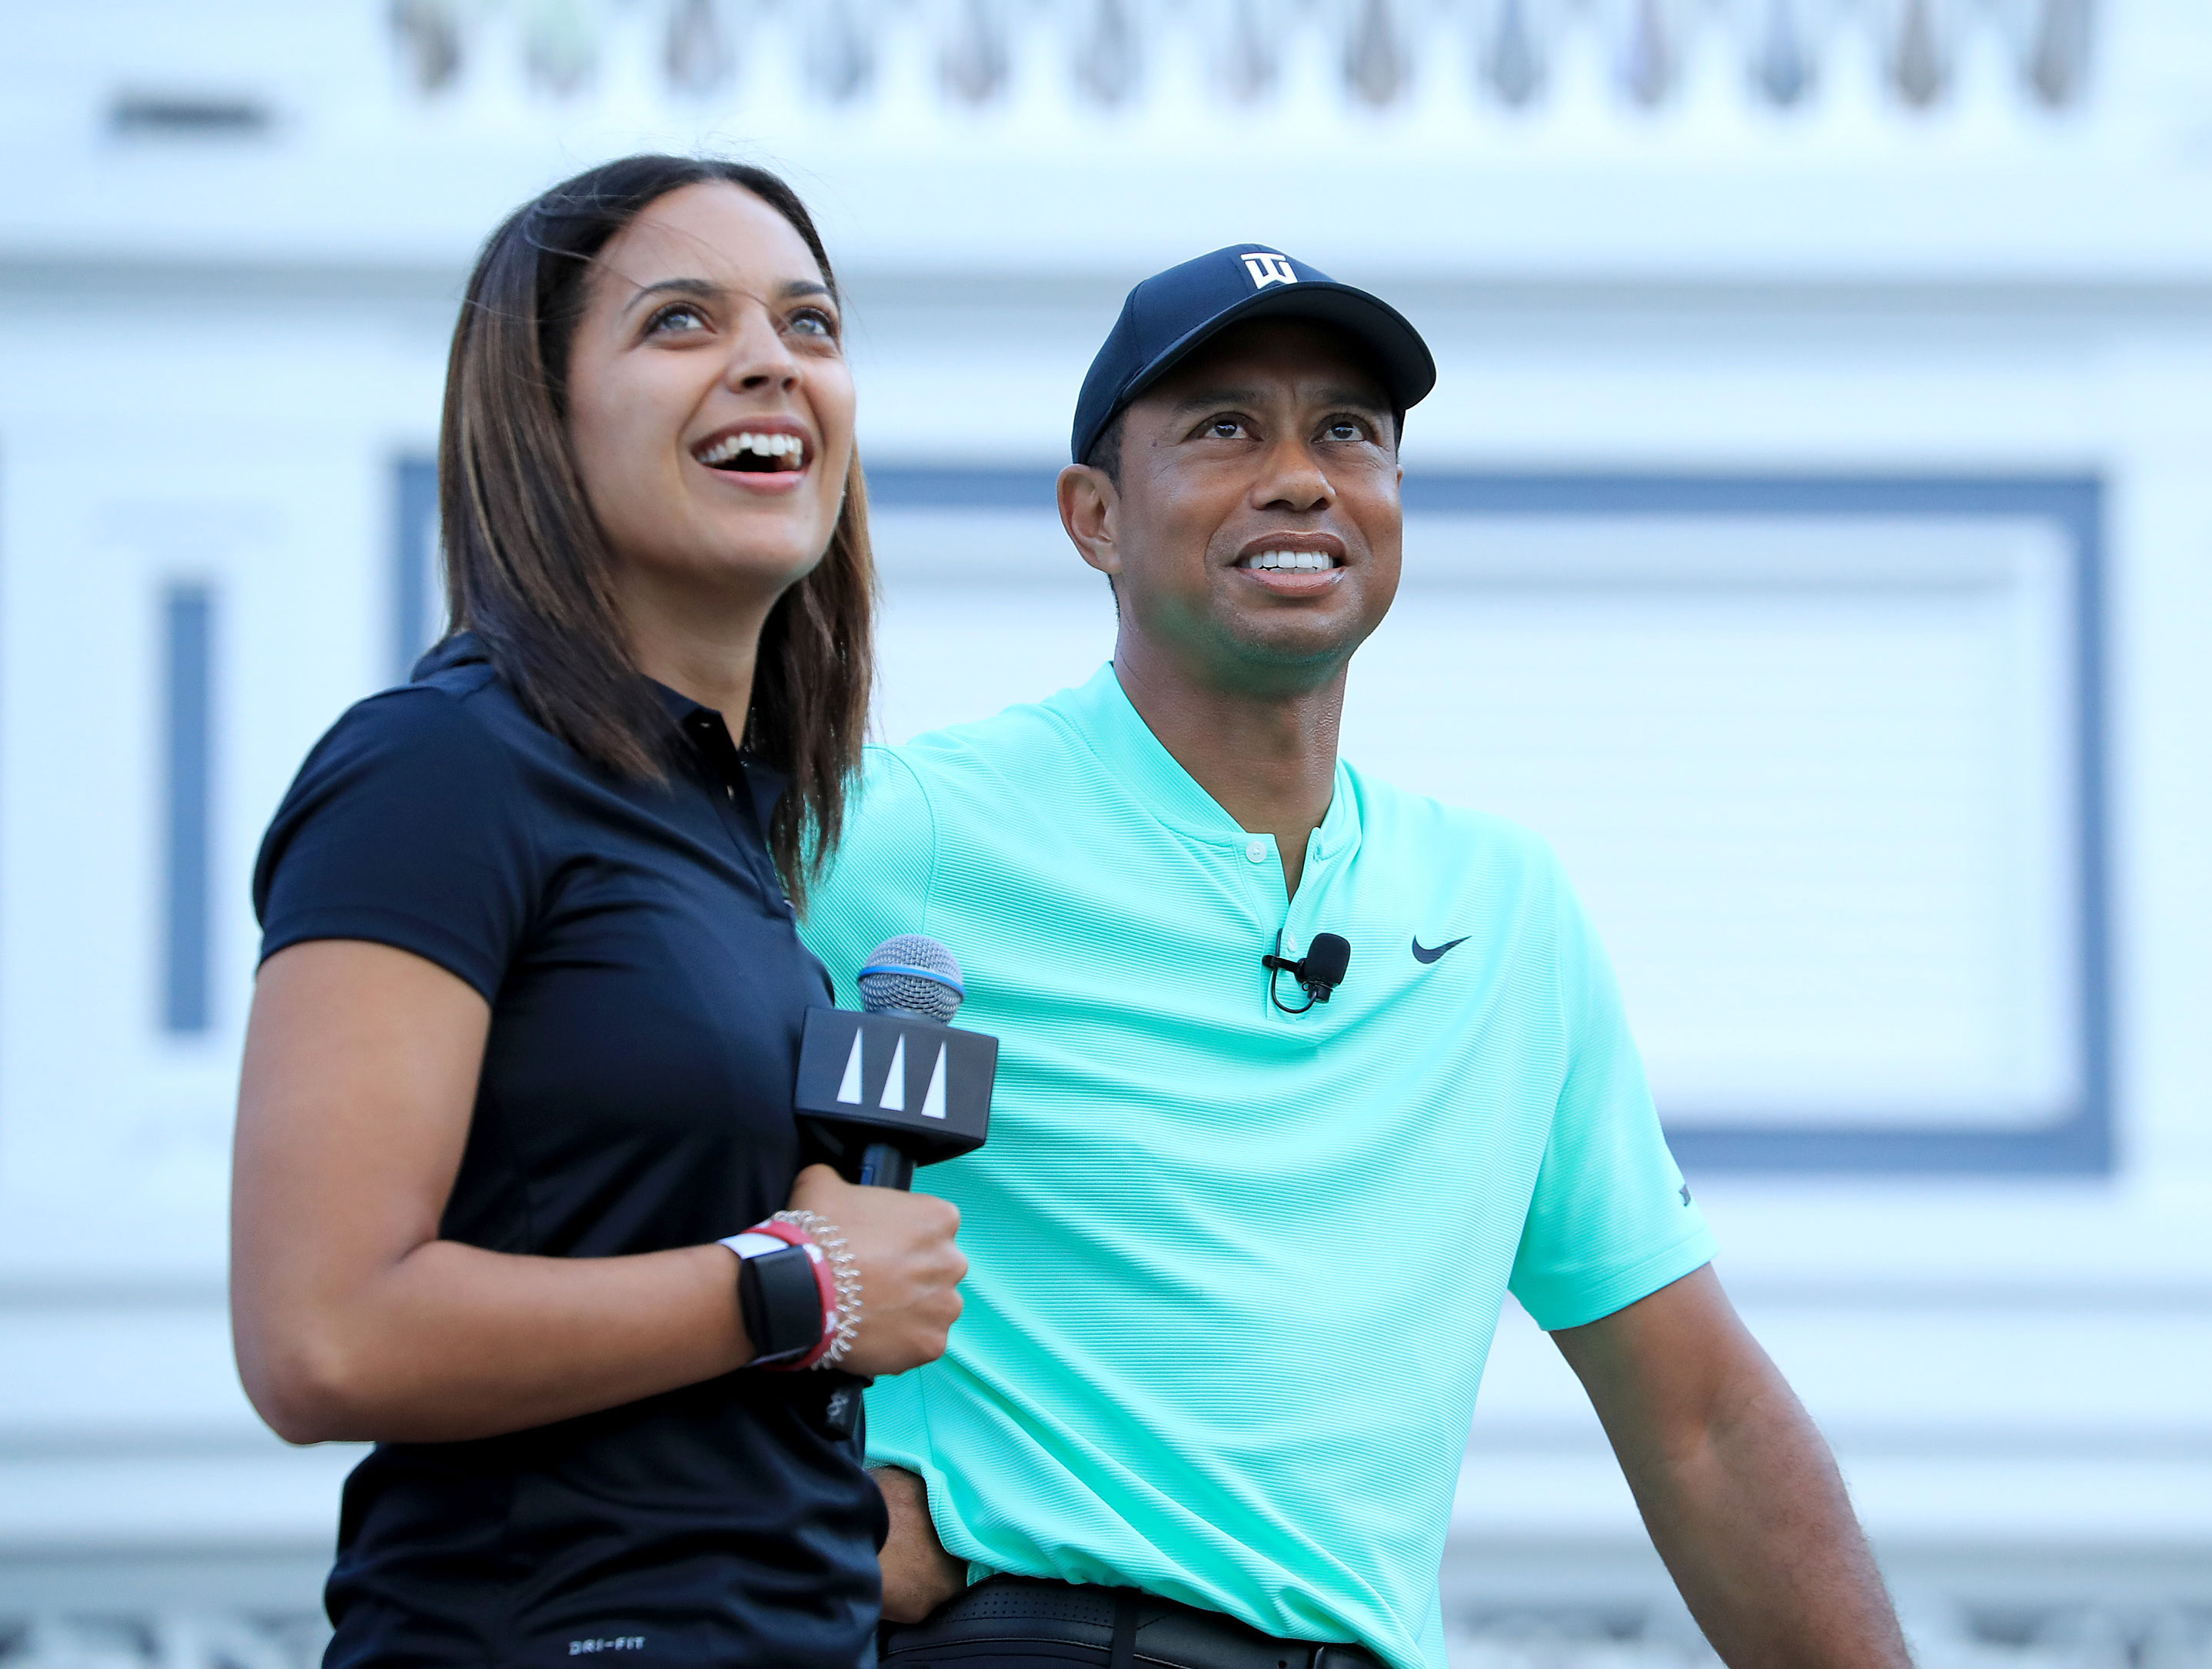 II. The Importance of Diversity in the Golfing Community